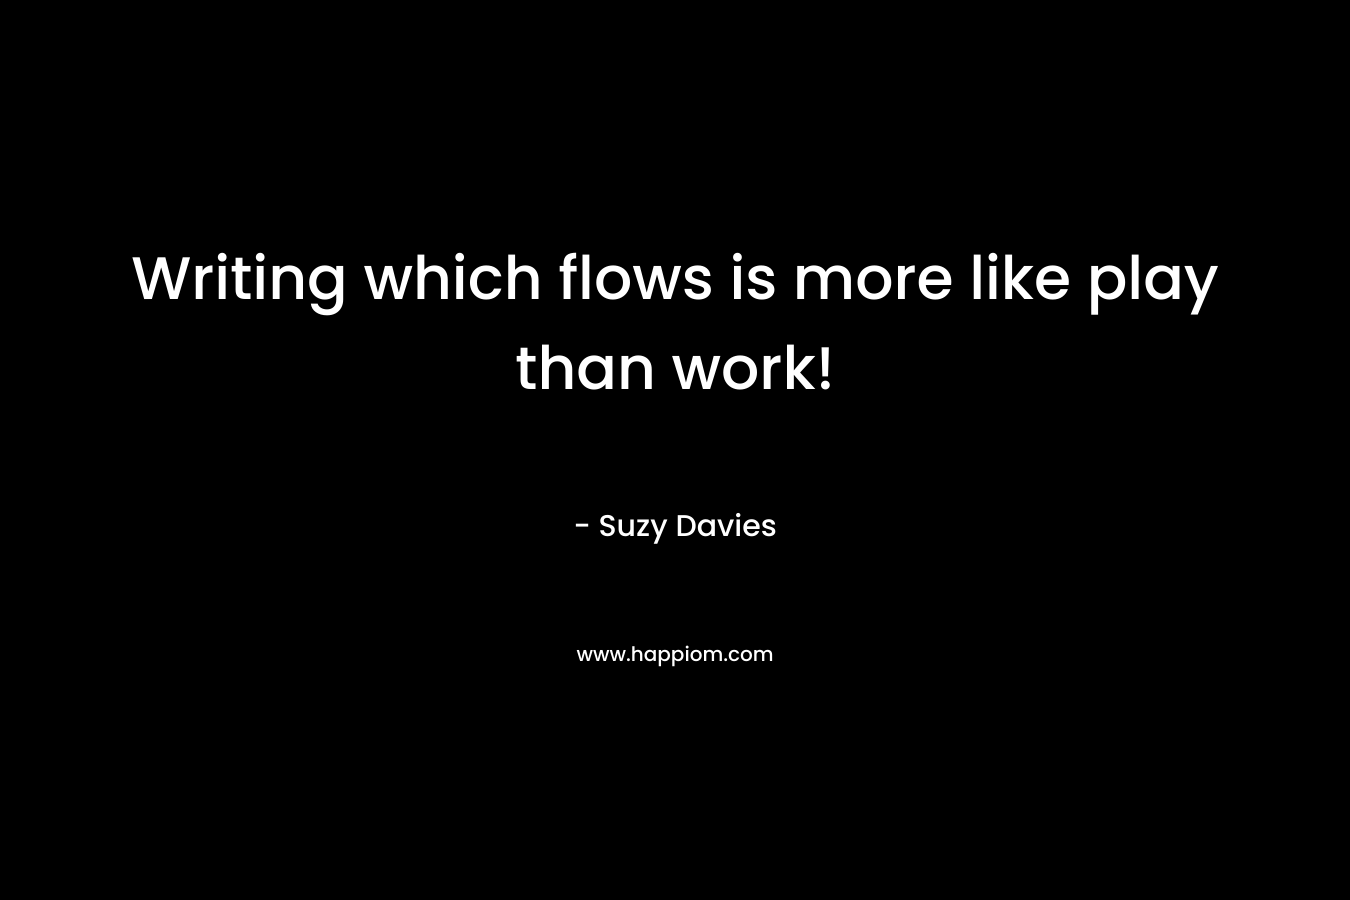 Writing which flows is more like play than work!